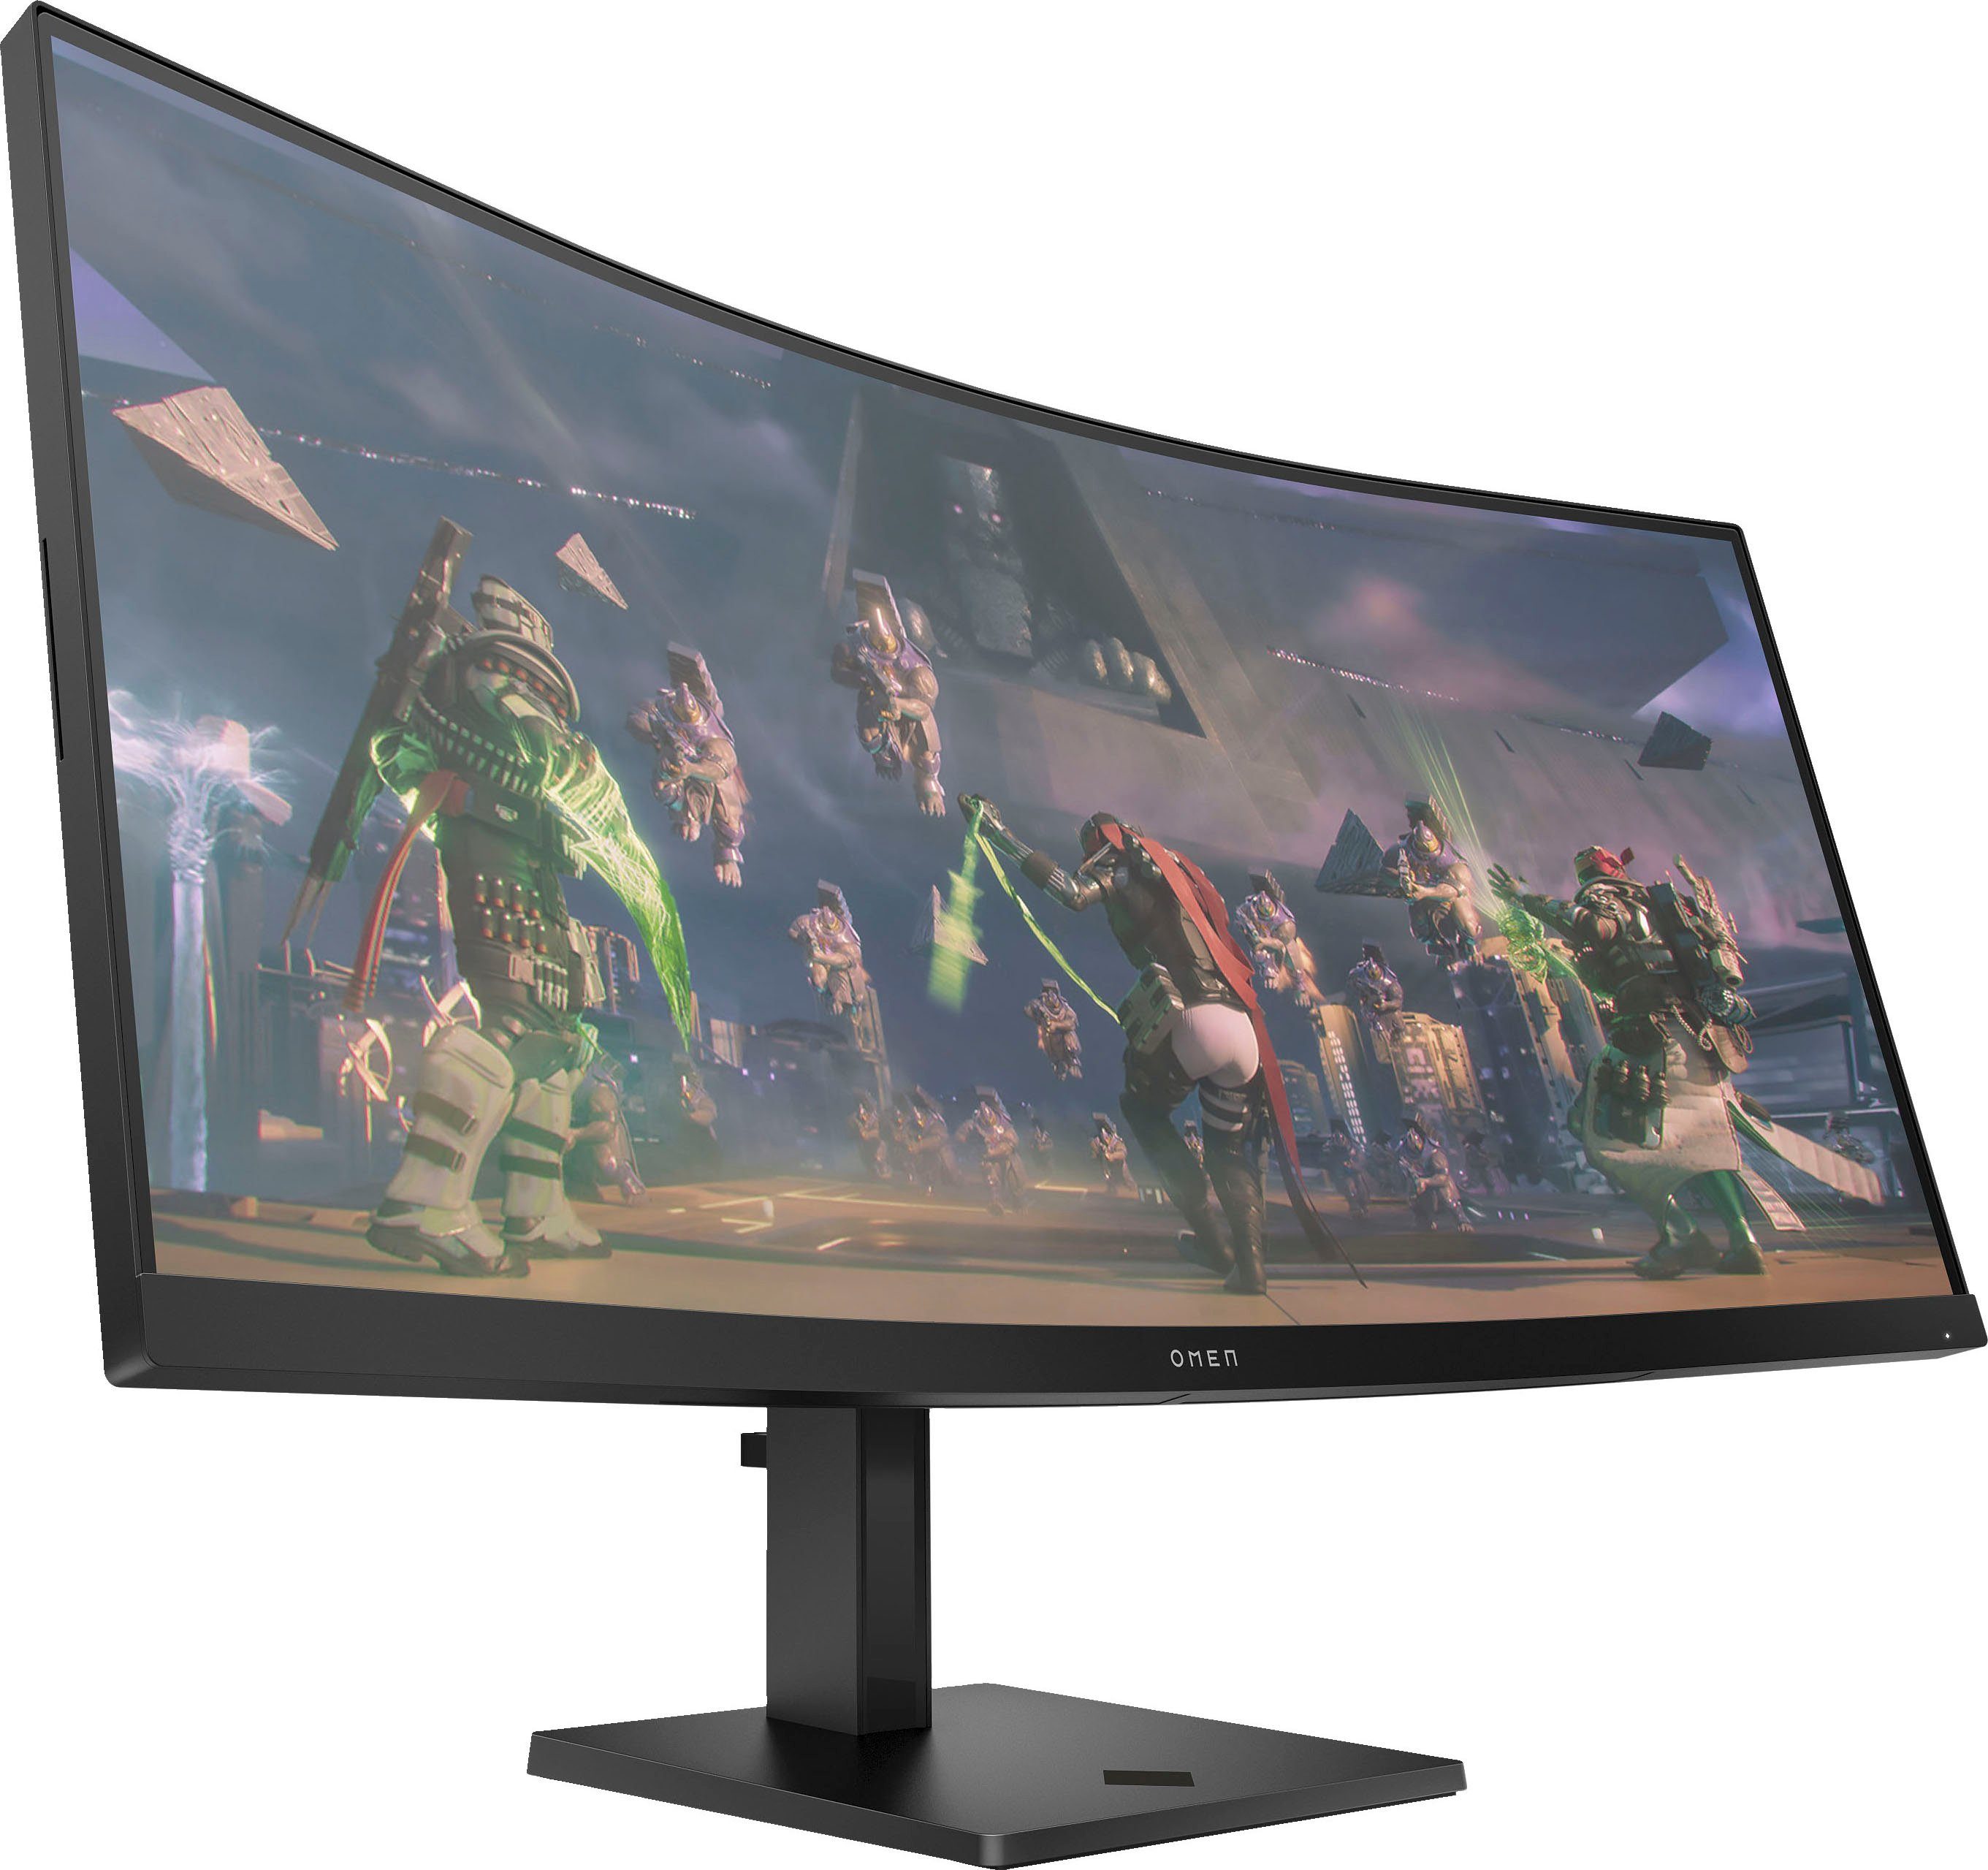 34c cm/34 WQHD, LED) VA px, HP x 1440 Reaktionszeit, (86,4 (HSD-0159-A) 165 OMEN 1 Curved-Gaming-Monitor ", 3440 ms Hz,